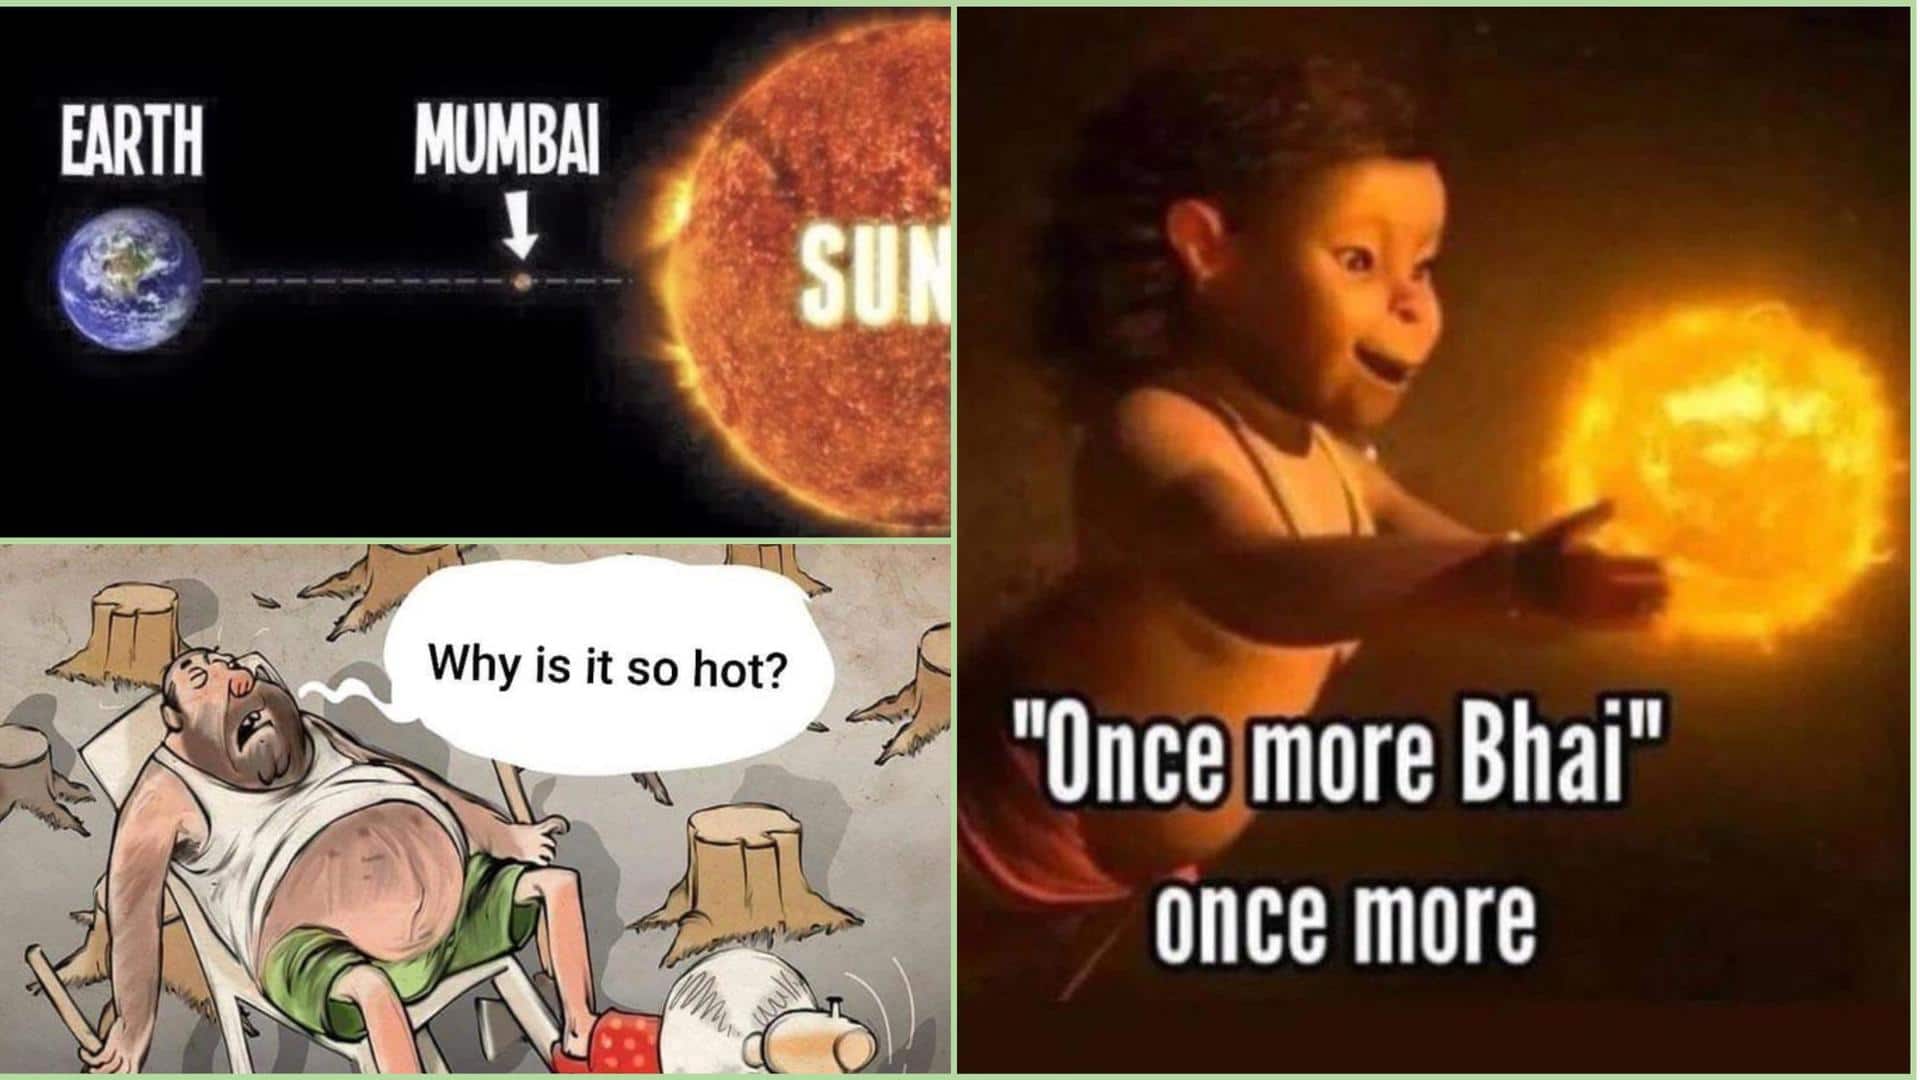 Twitter explodes with hilarious memes as India braces for heatwave